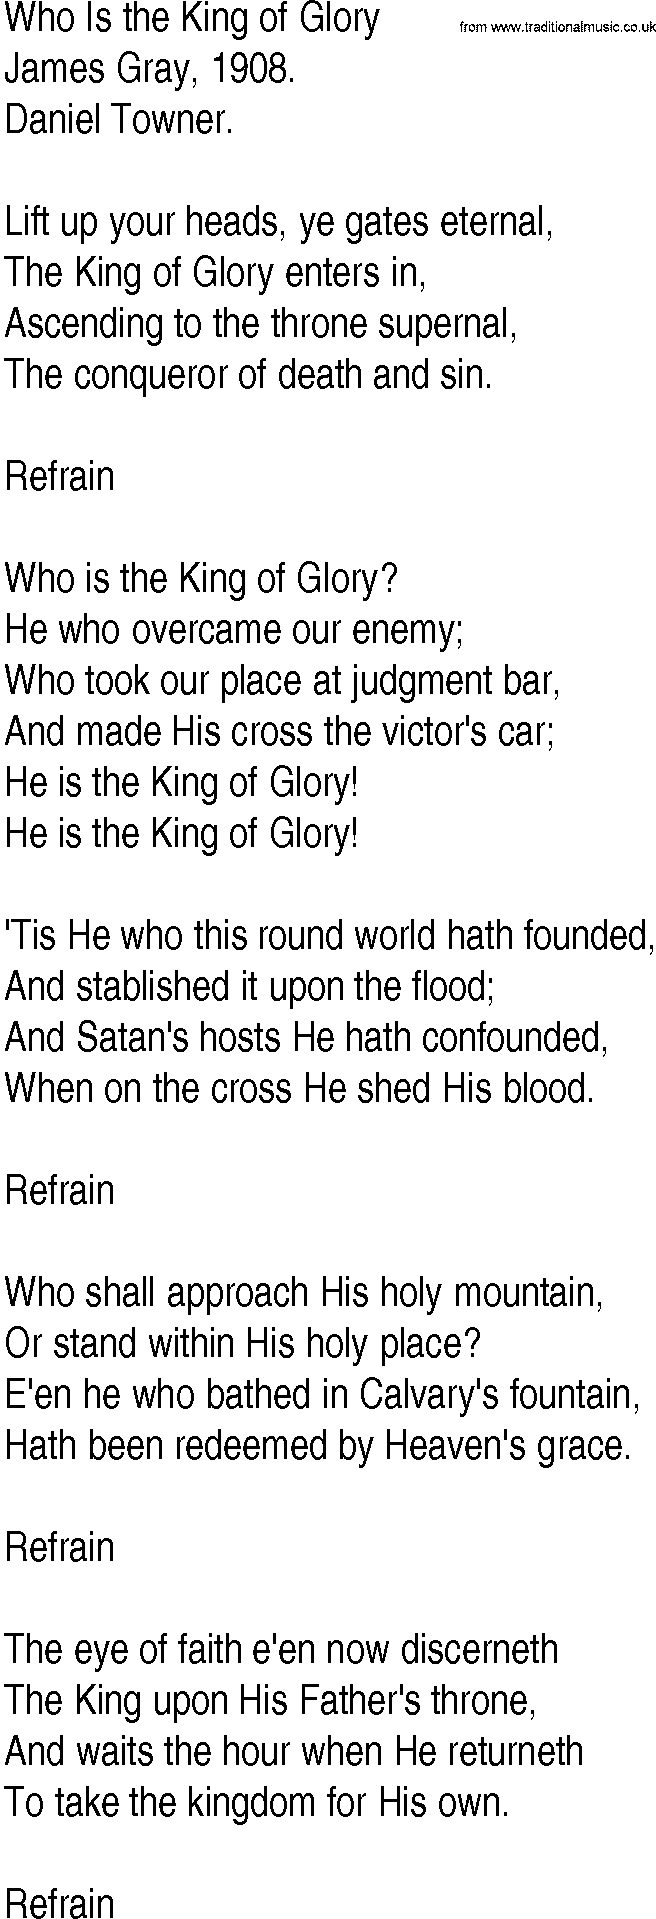 Hymn and Gospel Song: Who Is the King of Glory by James Gray lyrics